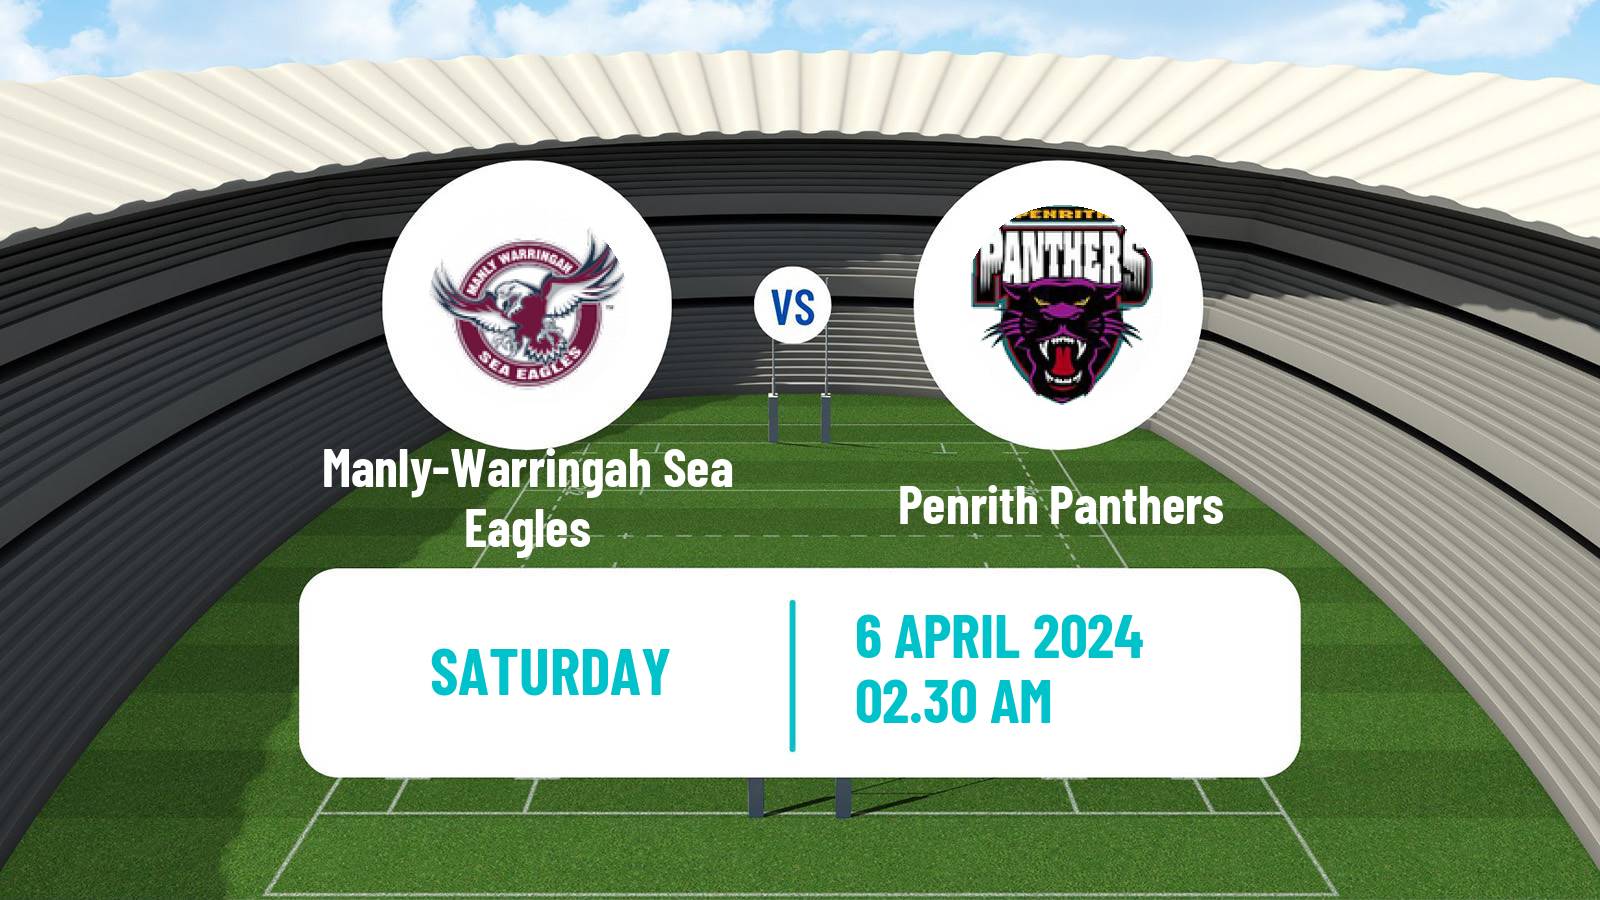 Rugby league Australian NRL Manly-Warringah Sea Eagles - Penrith Panthers